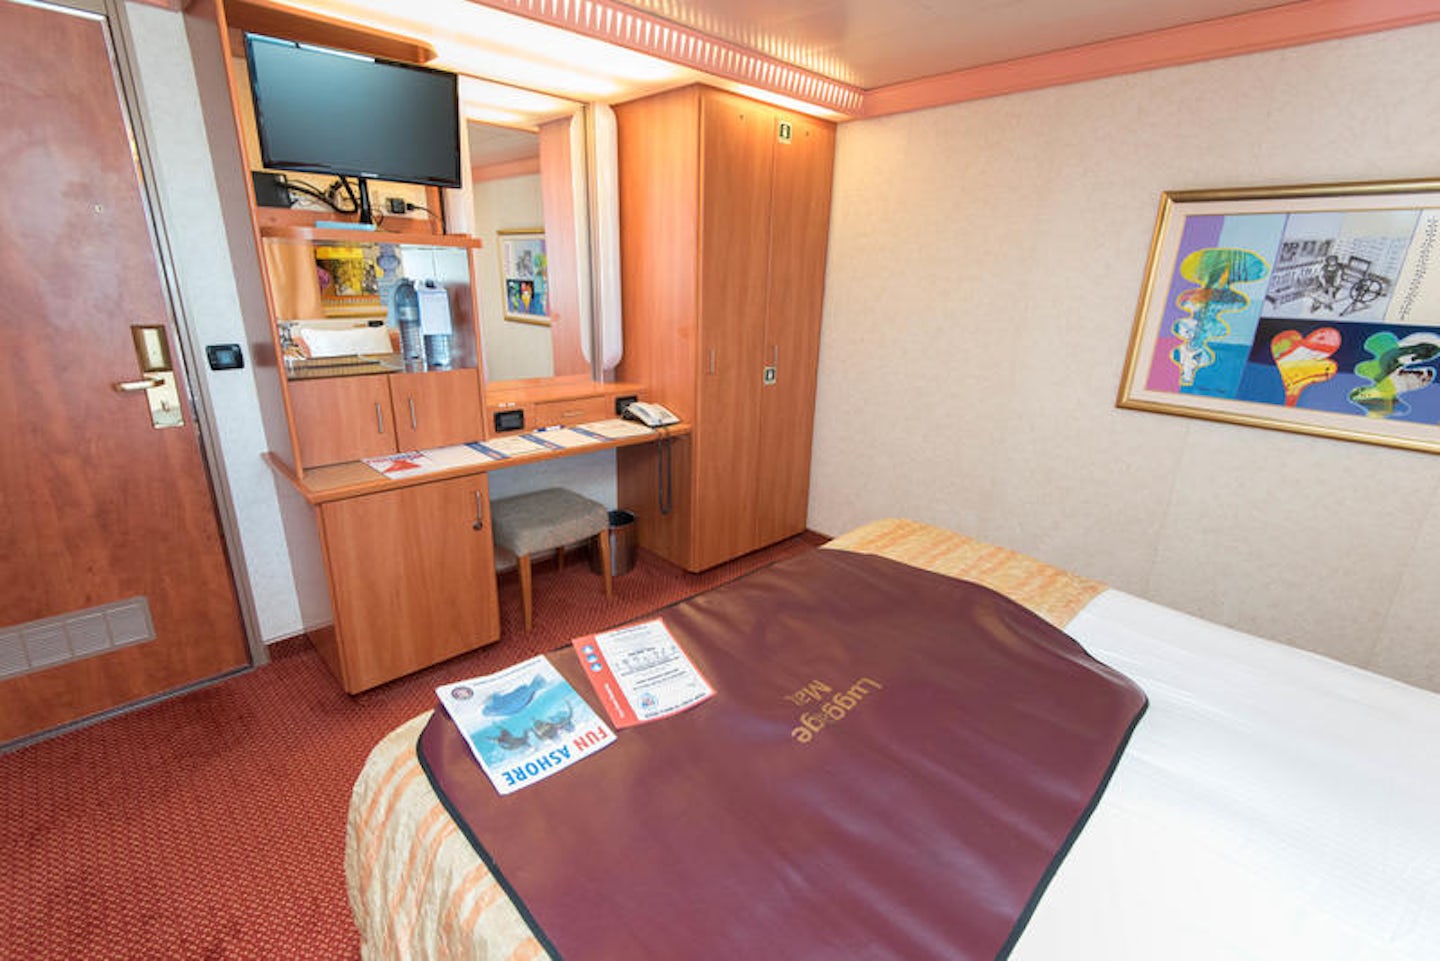 The Oceanview Cabin on Carnival Liberty